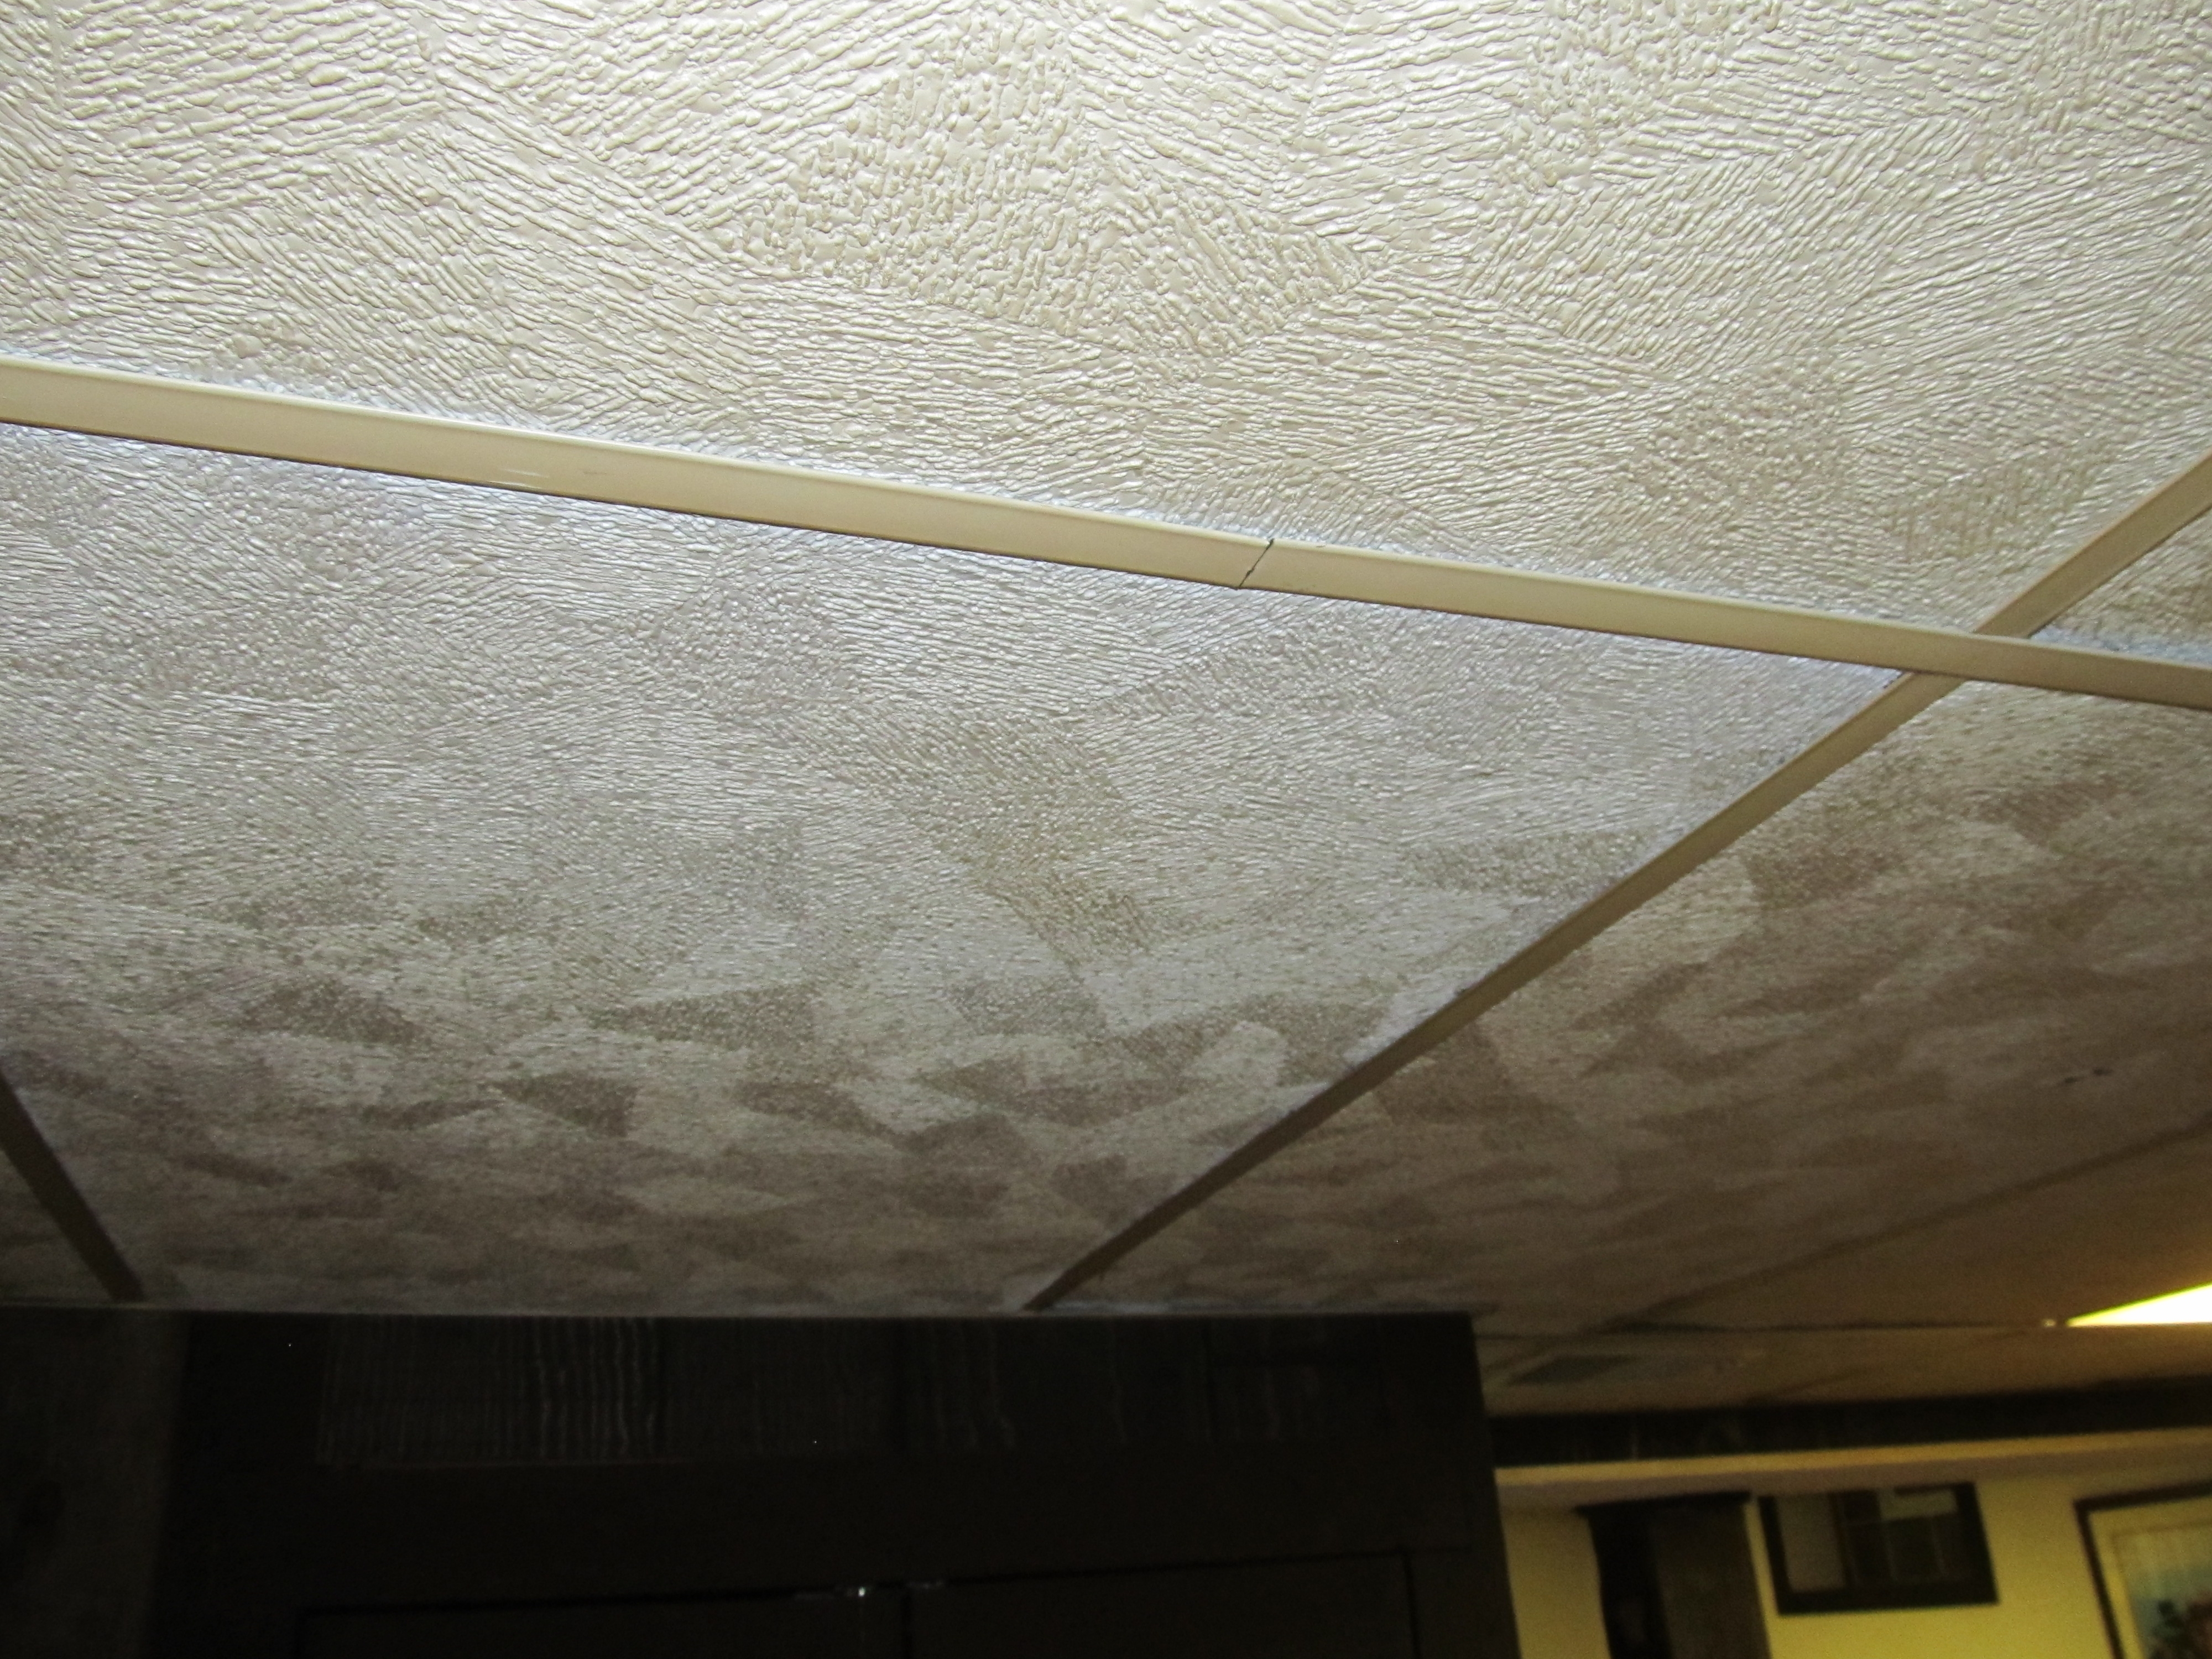 Covering Ceiling Tiles With Fabric